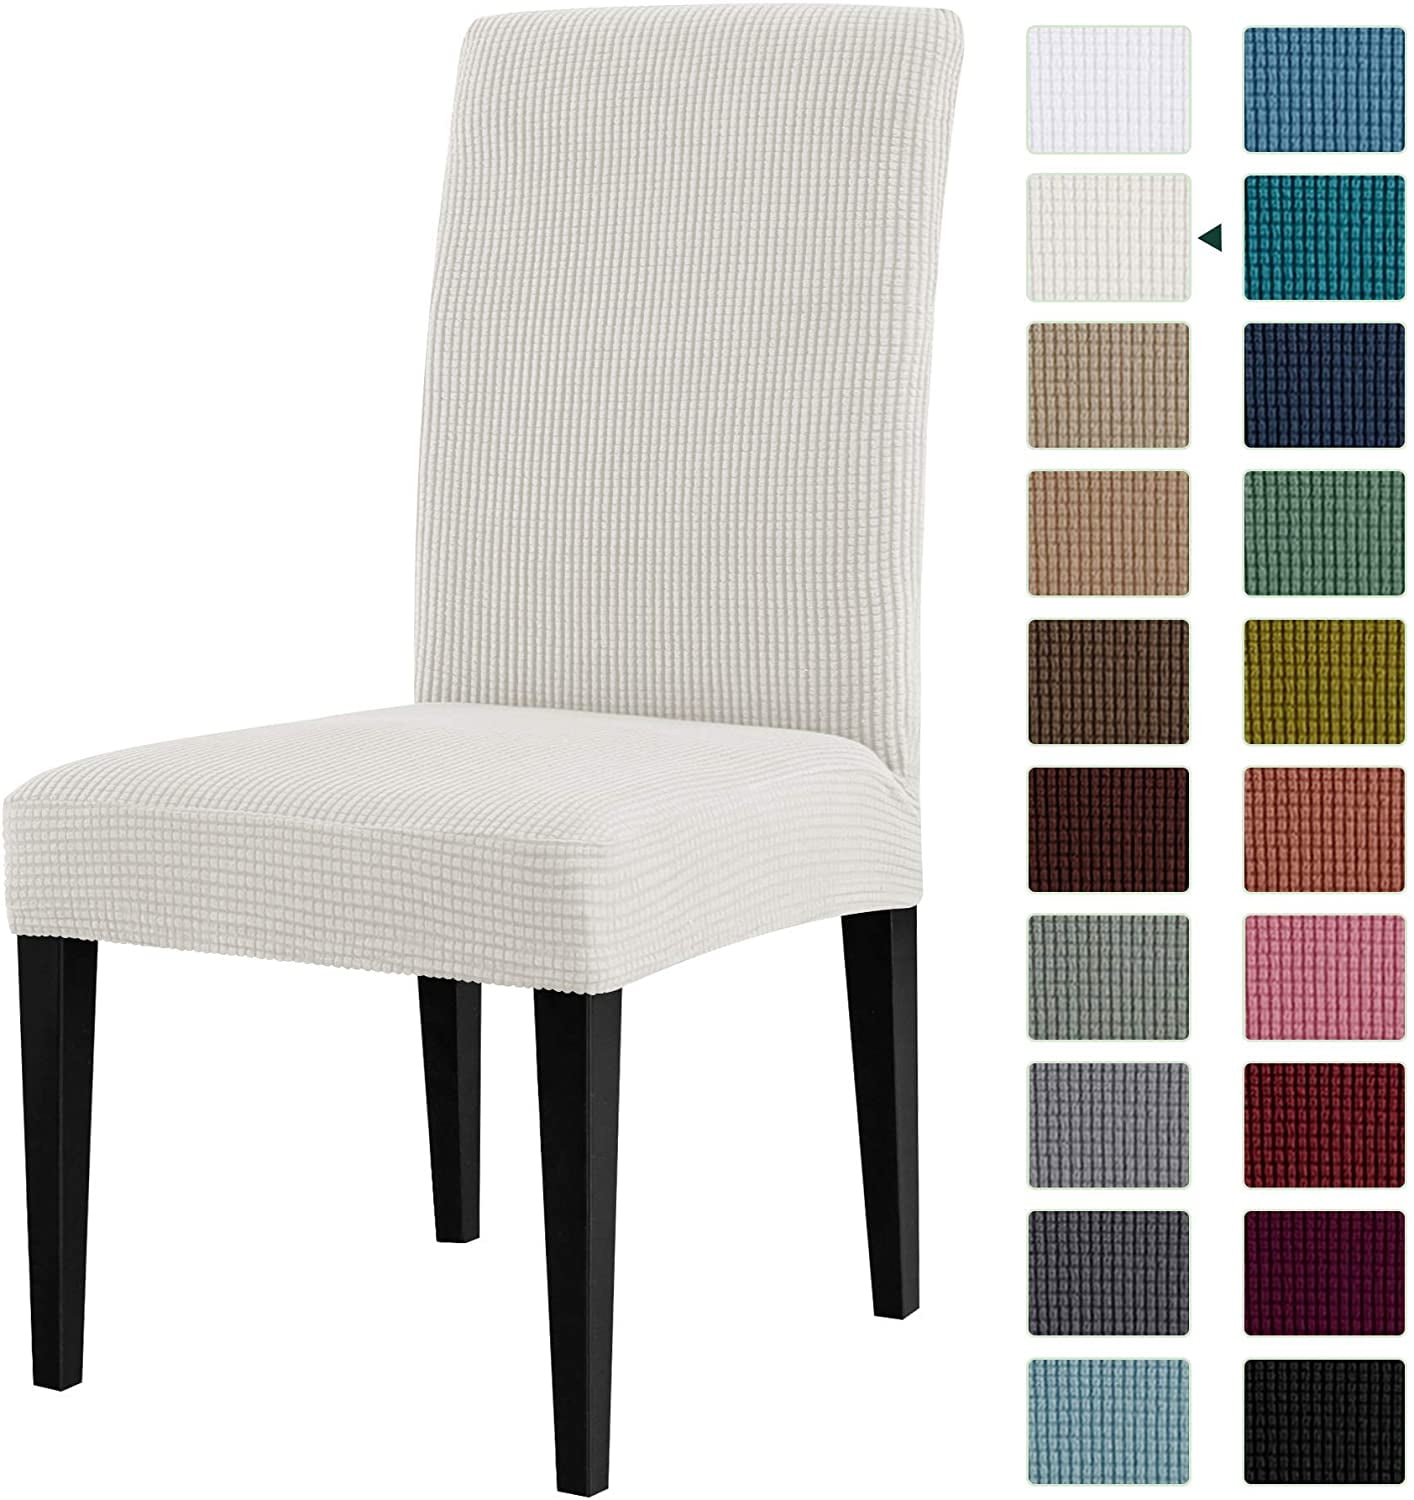 Details about   1/4/6PC Chair Covers Dining Room Jacquard Stretch Slipcover Seat Cover Protector 